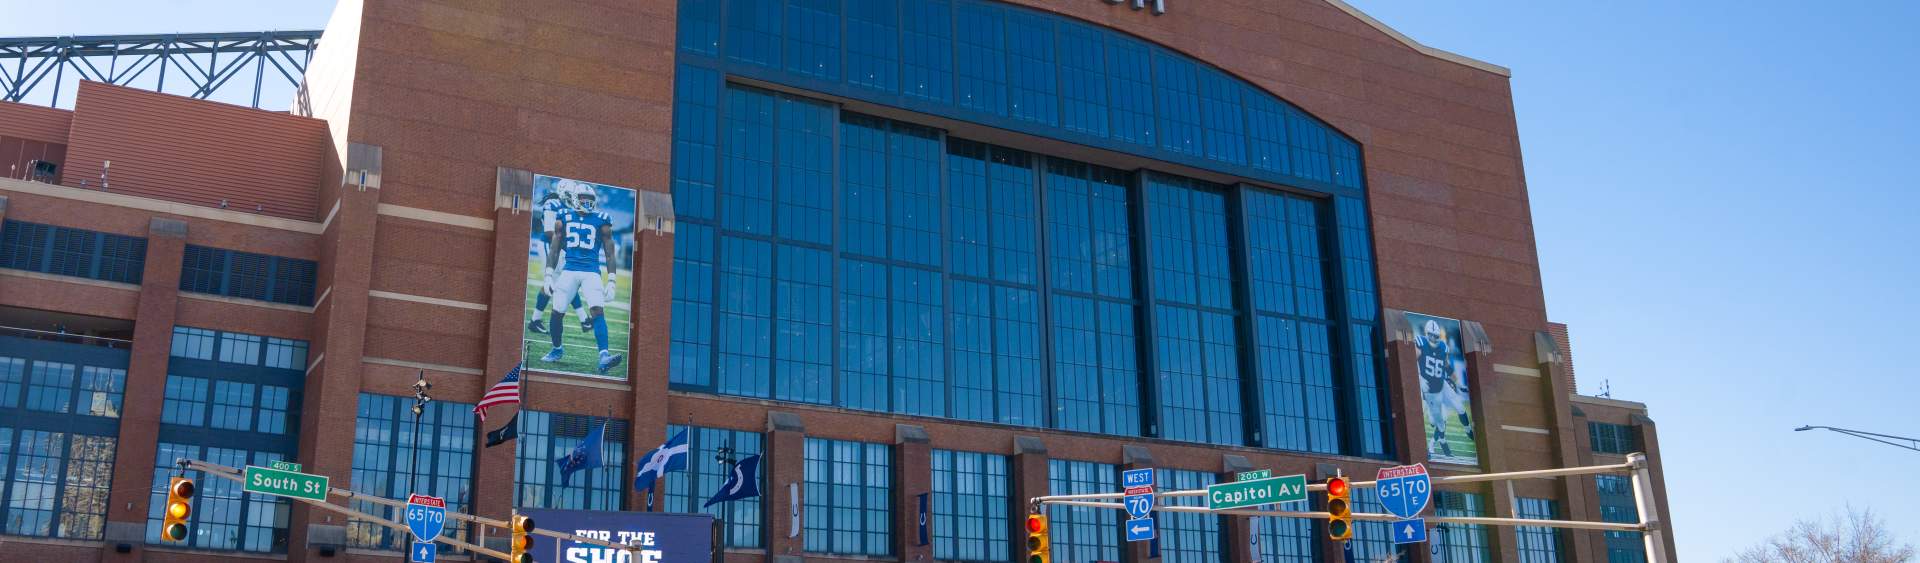 Get ready for Gameday at Lucas Oil Stadium